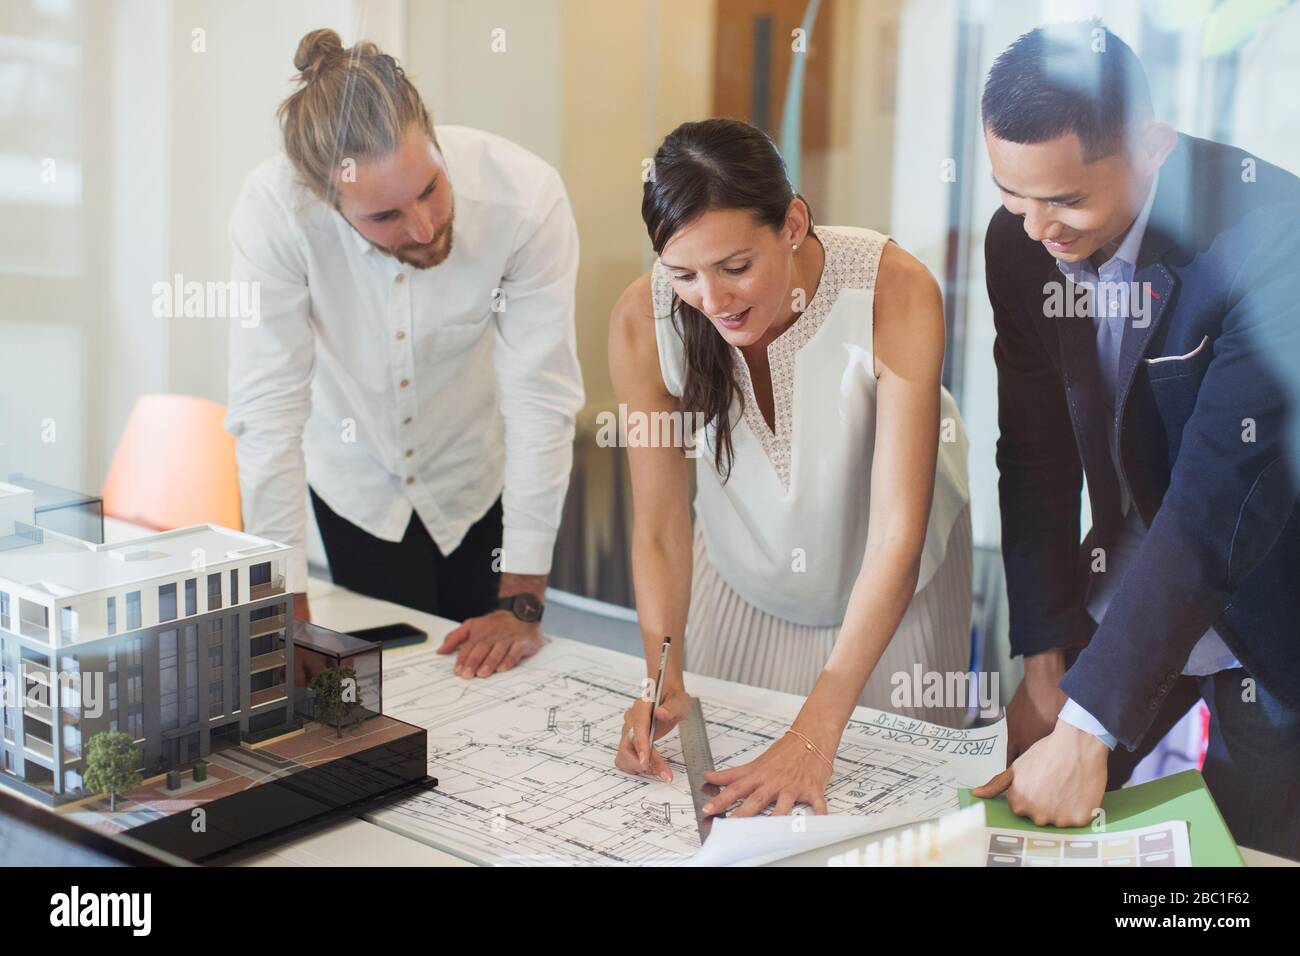 Architects drafting blueprint in office Stock Photo